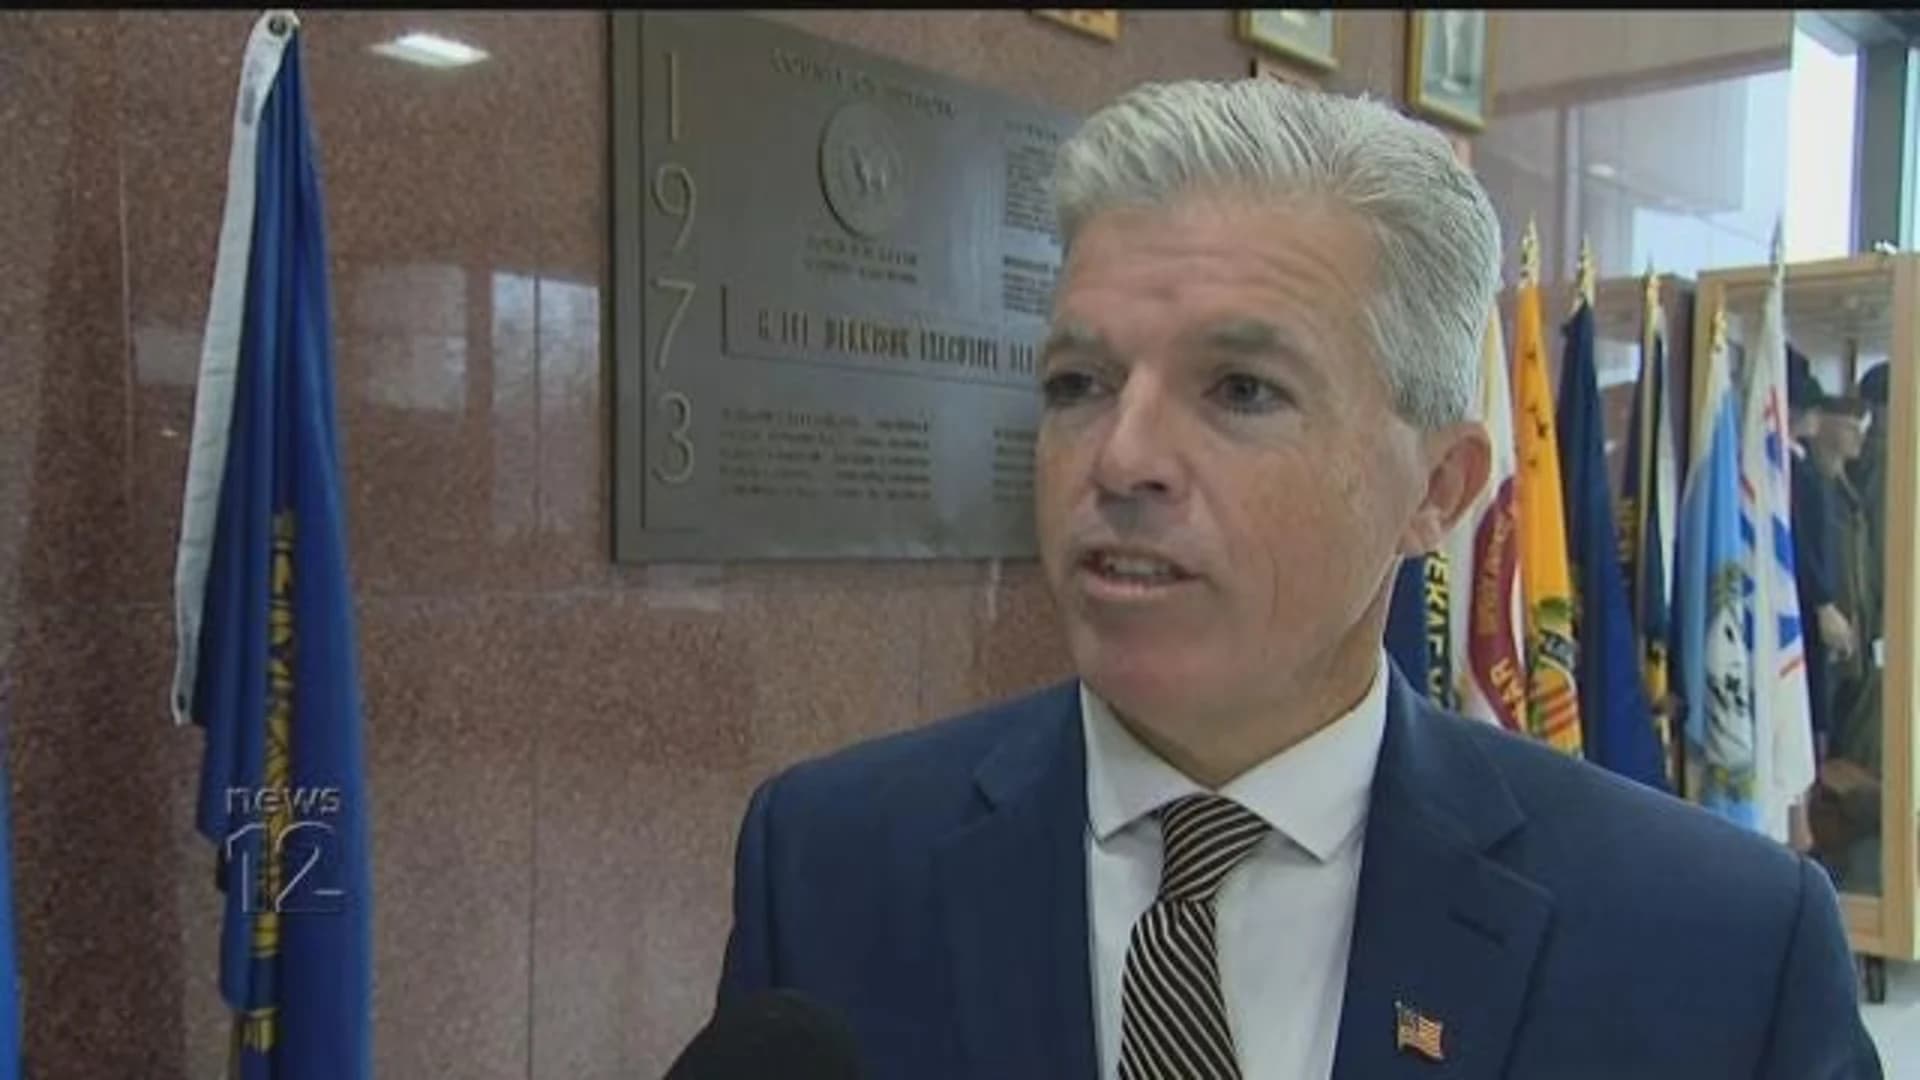 WATCH LIVE: Suffolk County Executive Bellone gives COVID-19 update